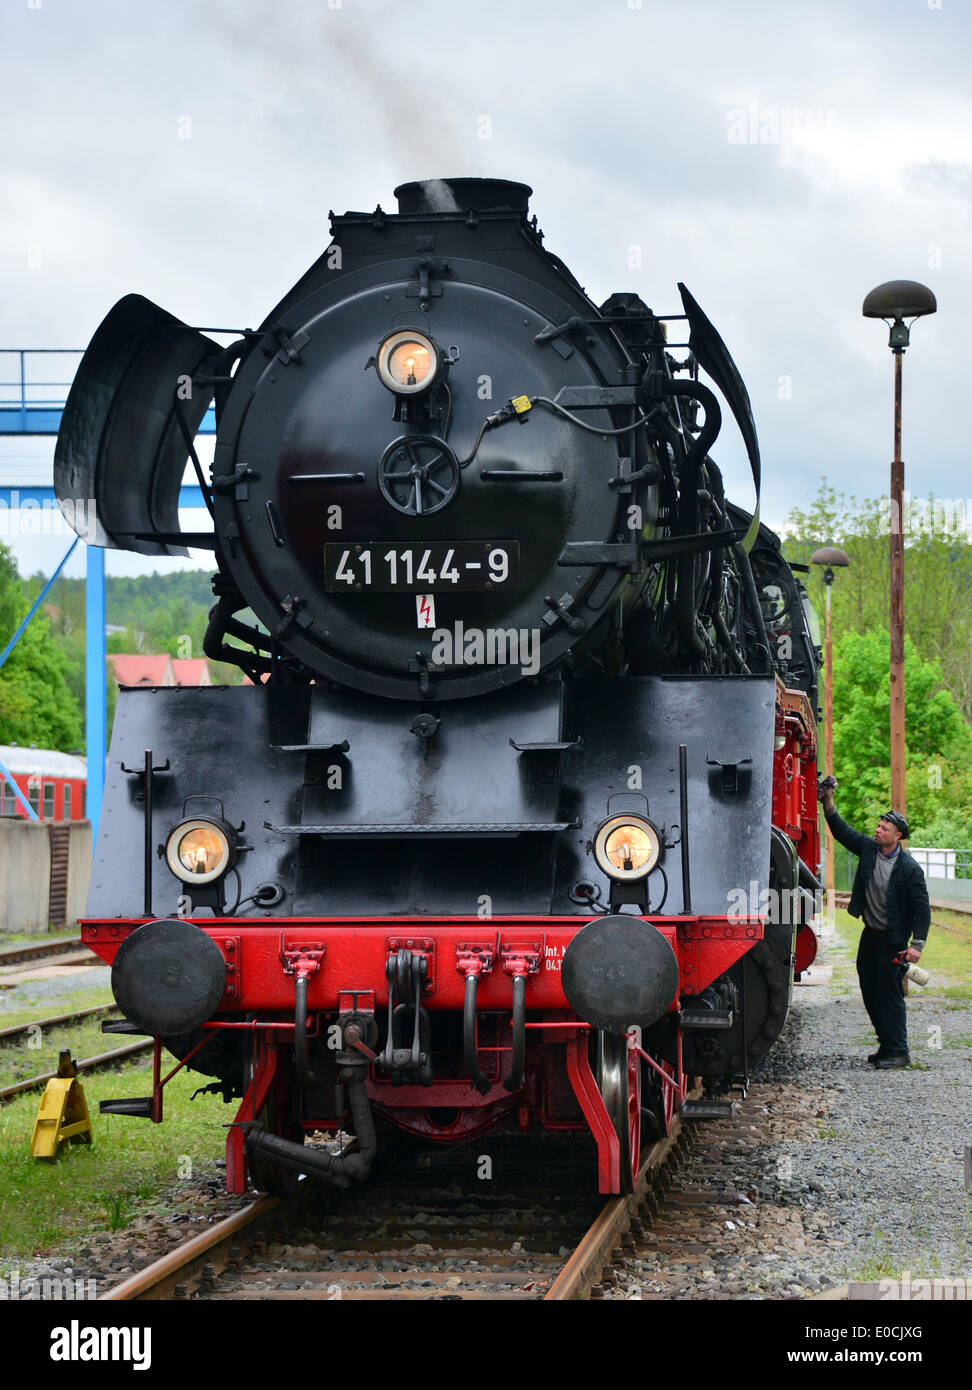 Engineer Matthias Boese polishes a 41 series locomotive from 1938 during the 100th birthday of the Meiningen steam locomotive factory in Meiningen, Germany, 09 May 2014. It is the 100th anniversary of the founding of the factory. Photo: MARTIN SCHUTT/dpa Stock Photo